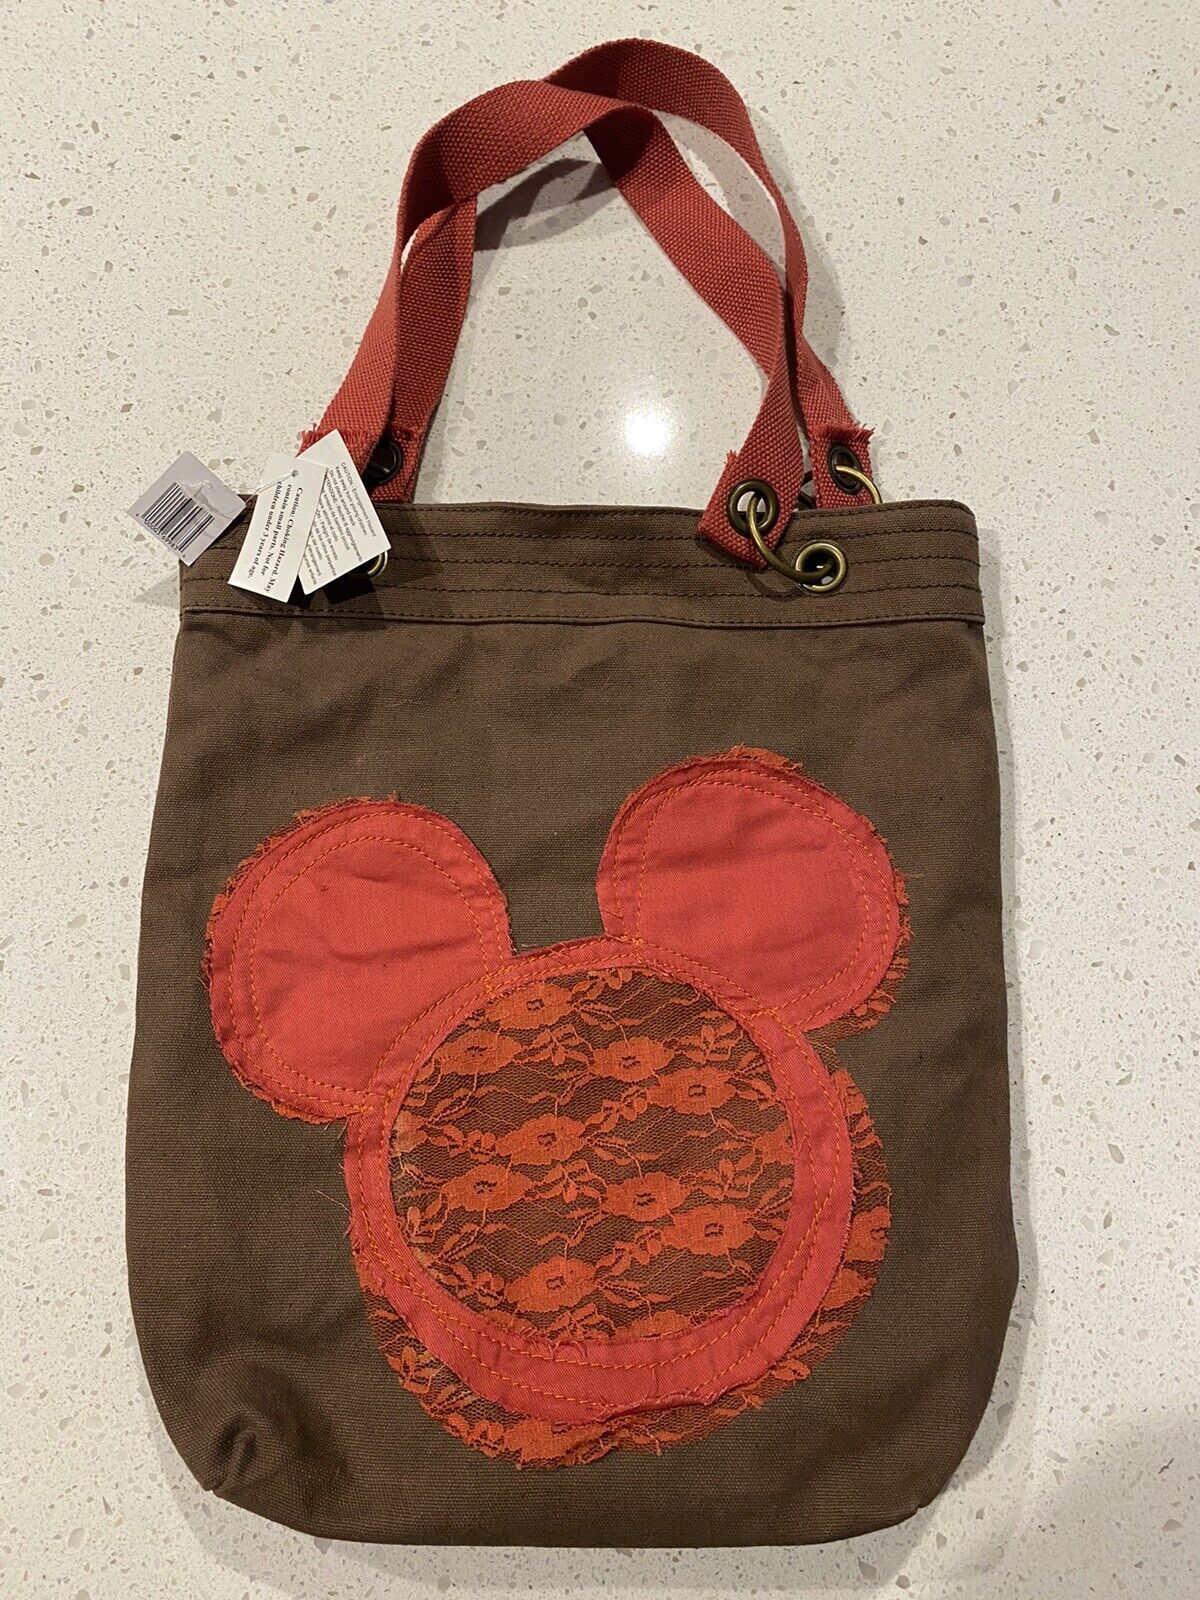 Disney Shoulder Tote Bag Canvas Lace Brown Rose Red Mickey Ears Pockets NWT